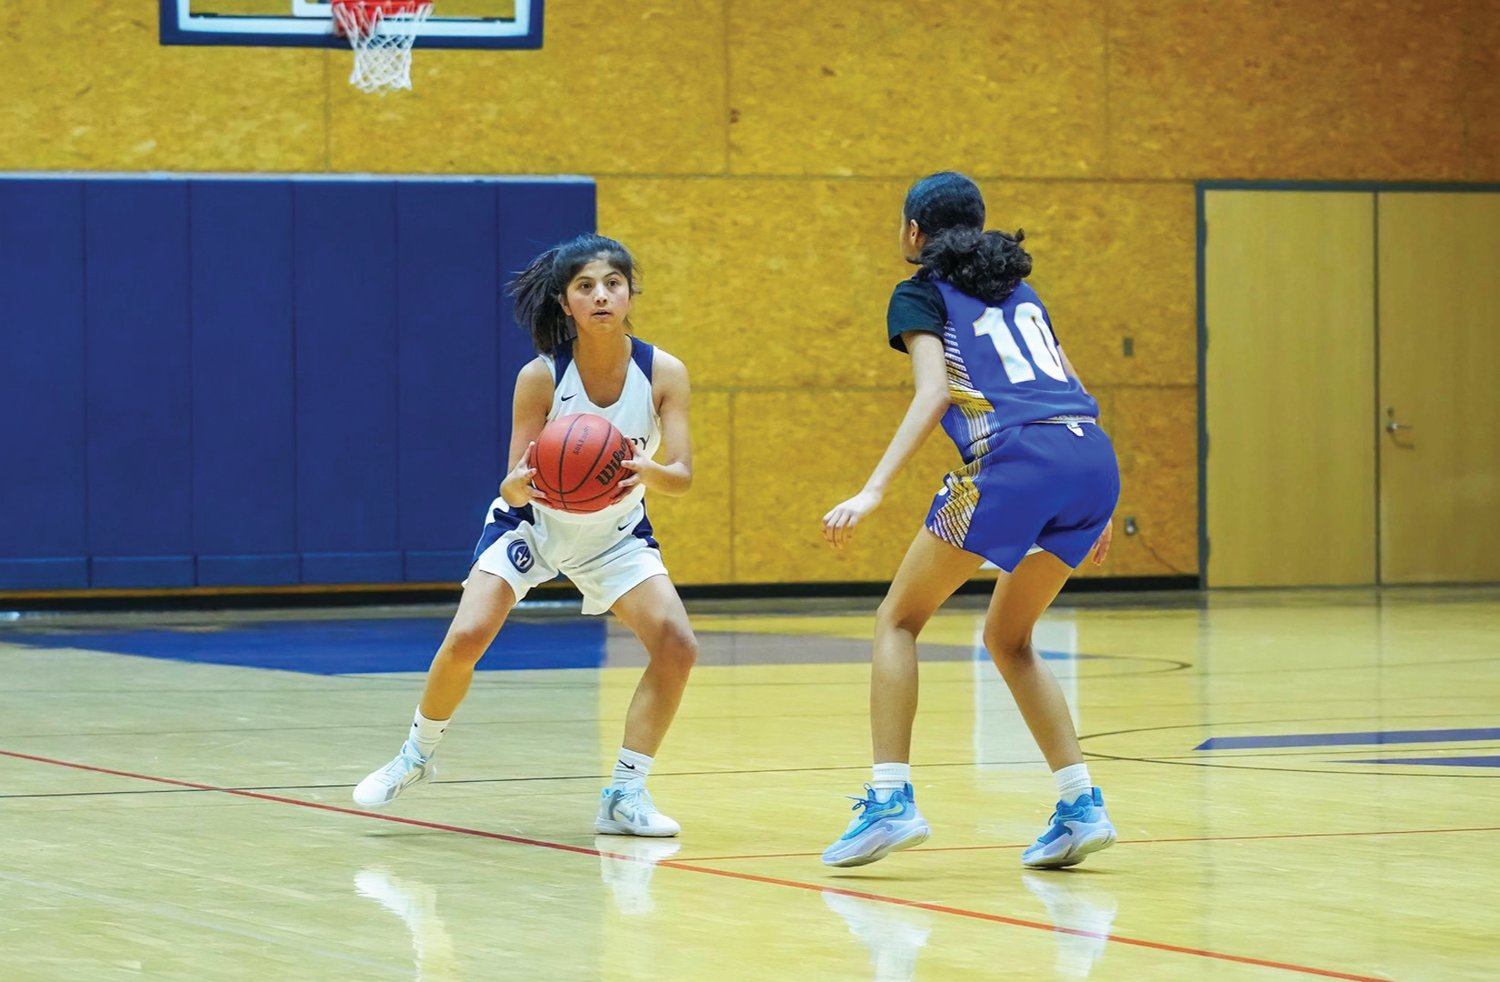 Solebury School senior Fatima Daryabi made five appearances this winter as a reserve for the girls basketball team.